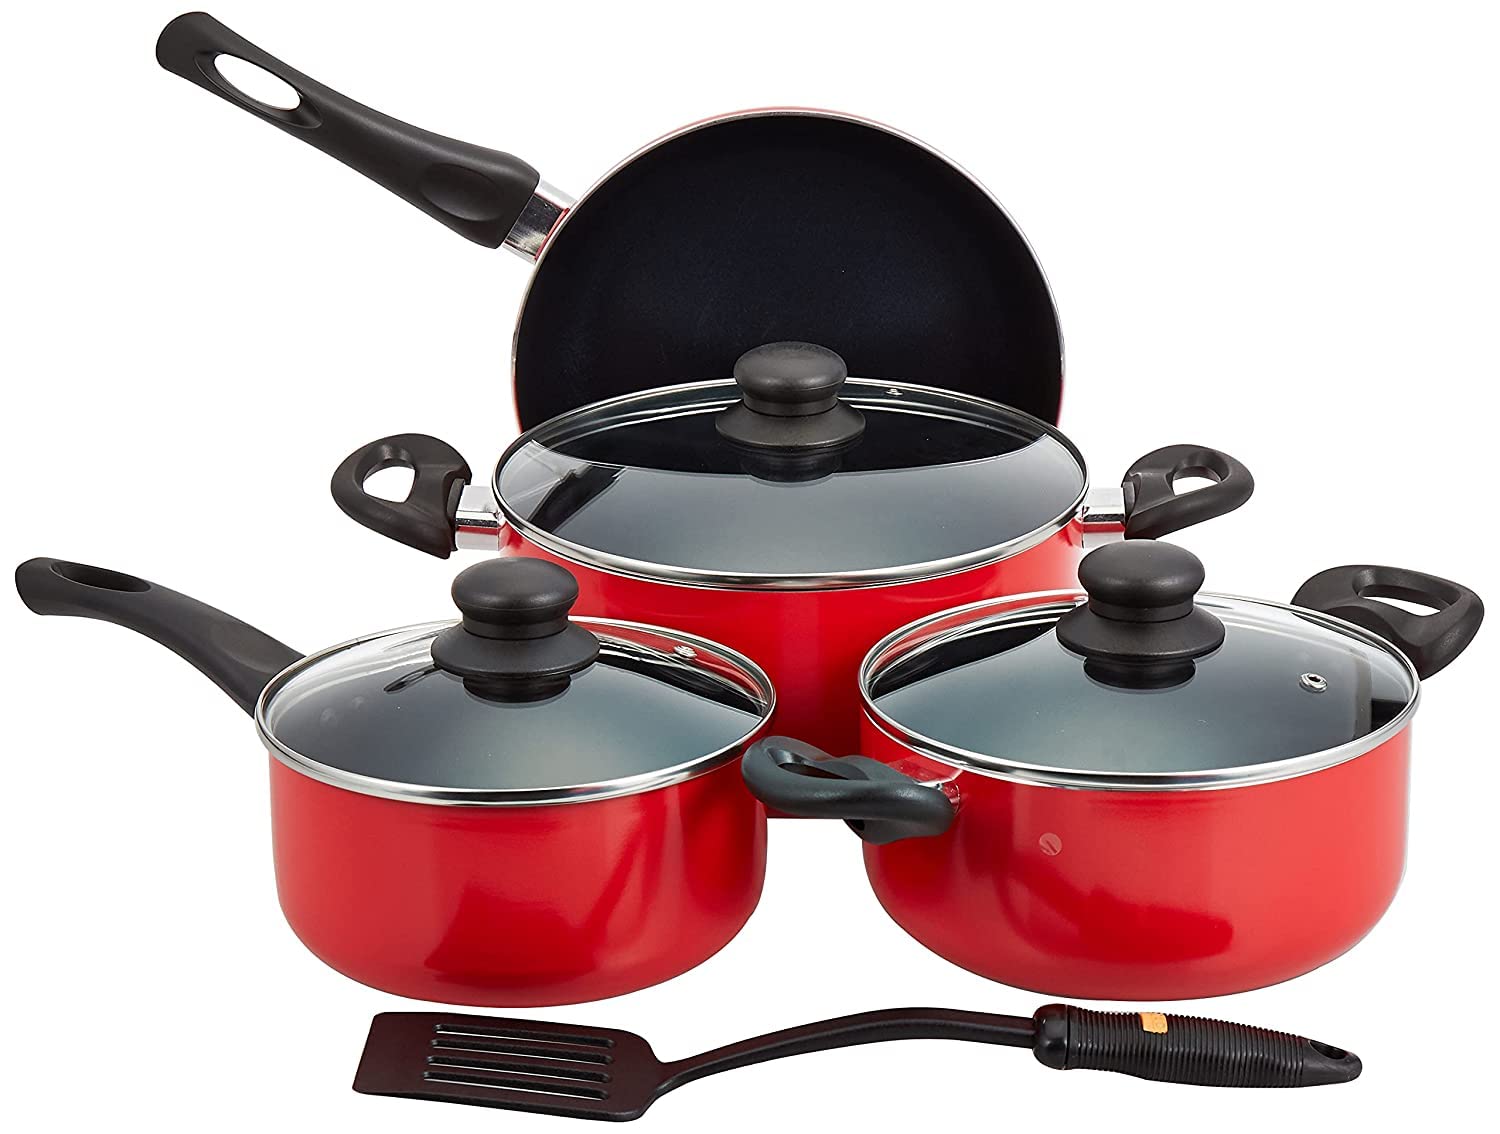 Royalford Cookware Set, 8 Pieces, Red, RF6082 Scratch Resistant, Tempered Glass Lids, 2.5MM Body Thickness, Bakelite Knobs, and CD Bottom